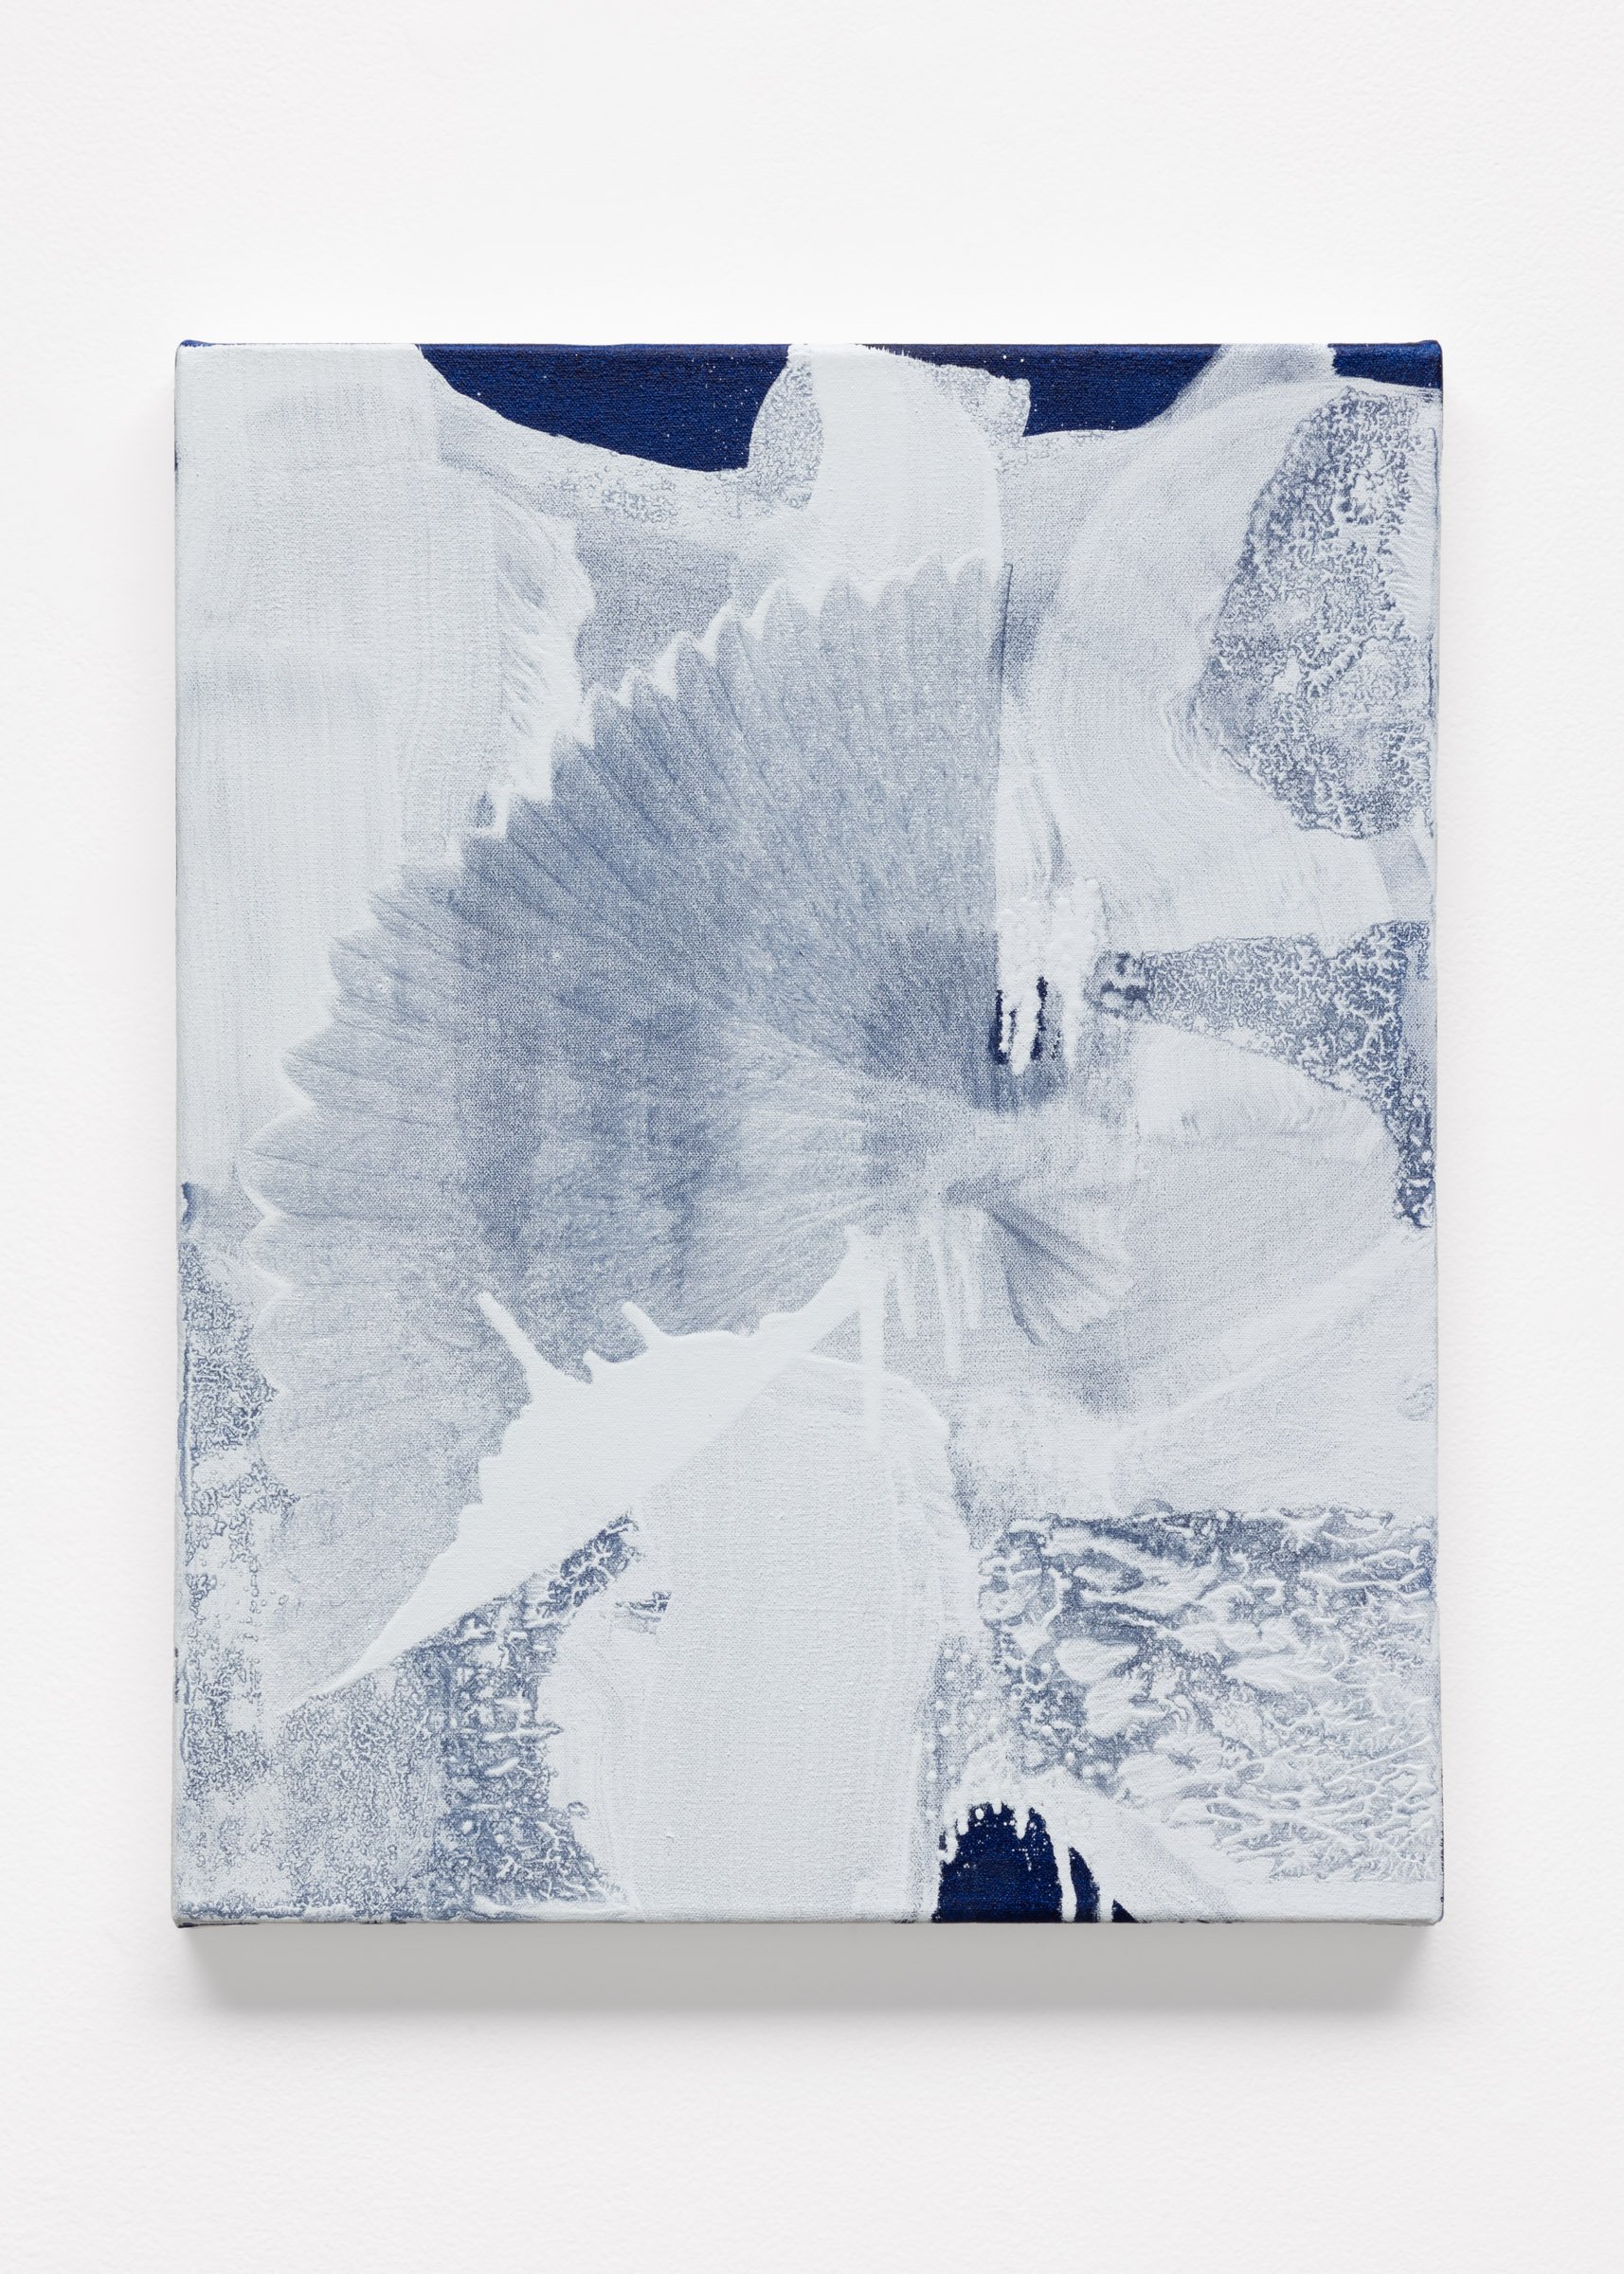  Celia Neubuaer Whispers in Ice, no. 10, 2023 oil and acrylic on canvas 20 x 16 inches 